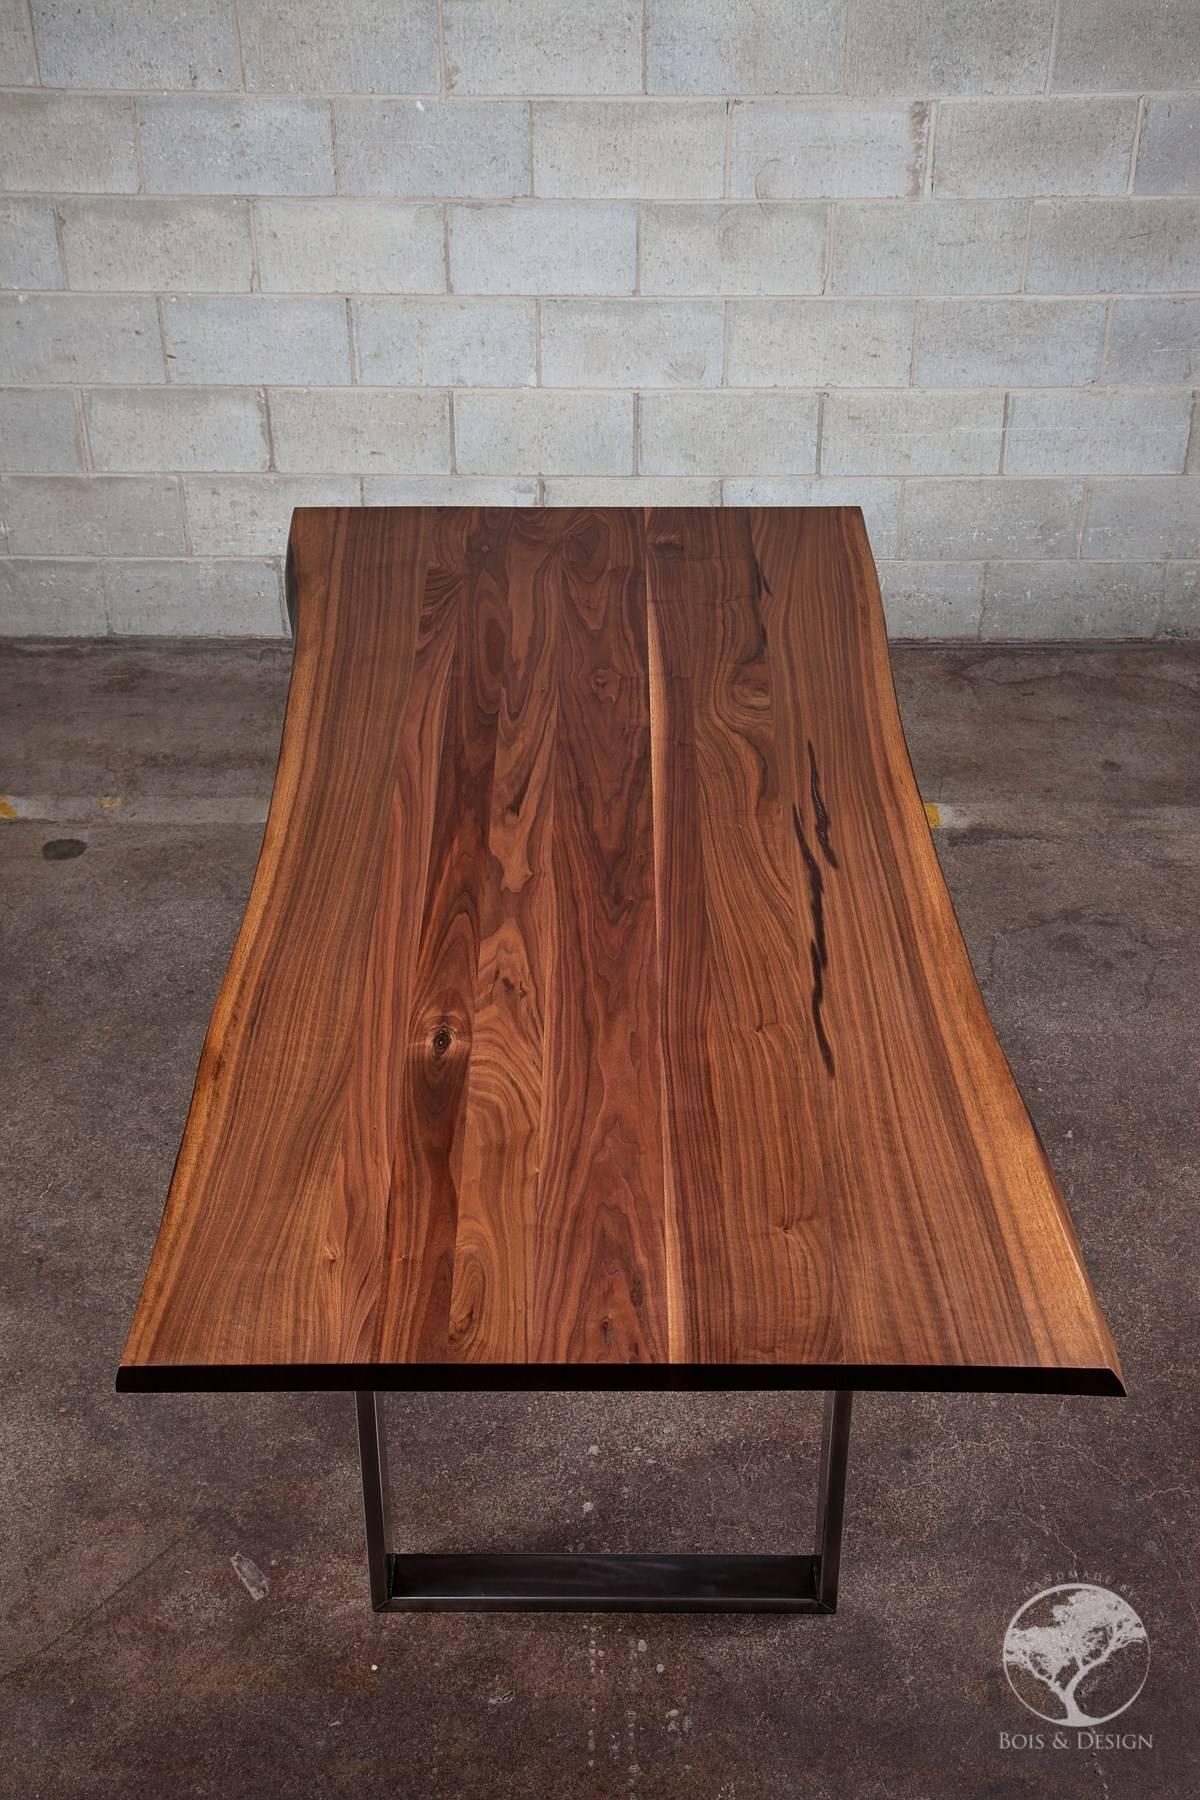 This black walnut dining table is a headturner.  It can be sitting on any style of legs. We let nature design with the curves, cracks and holes and our role is to protect the beauty by offering you one of the noblest woods in North America. The